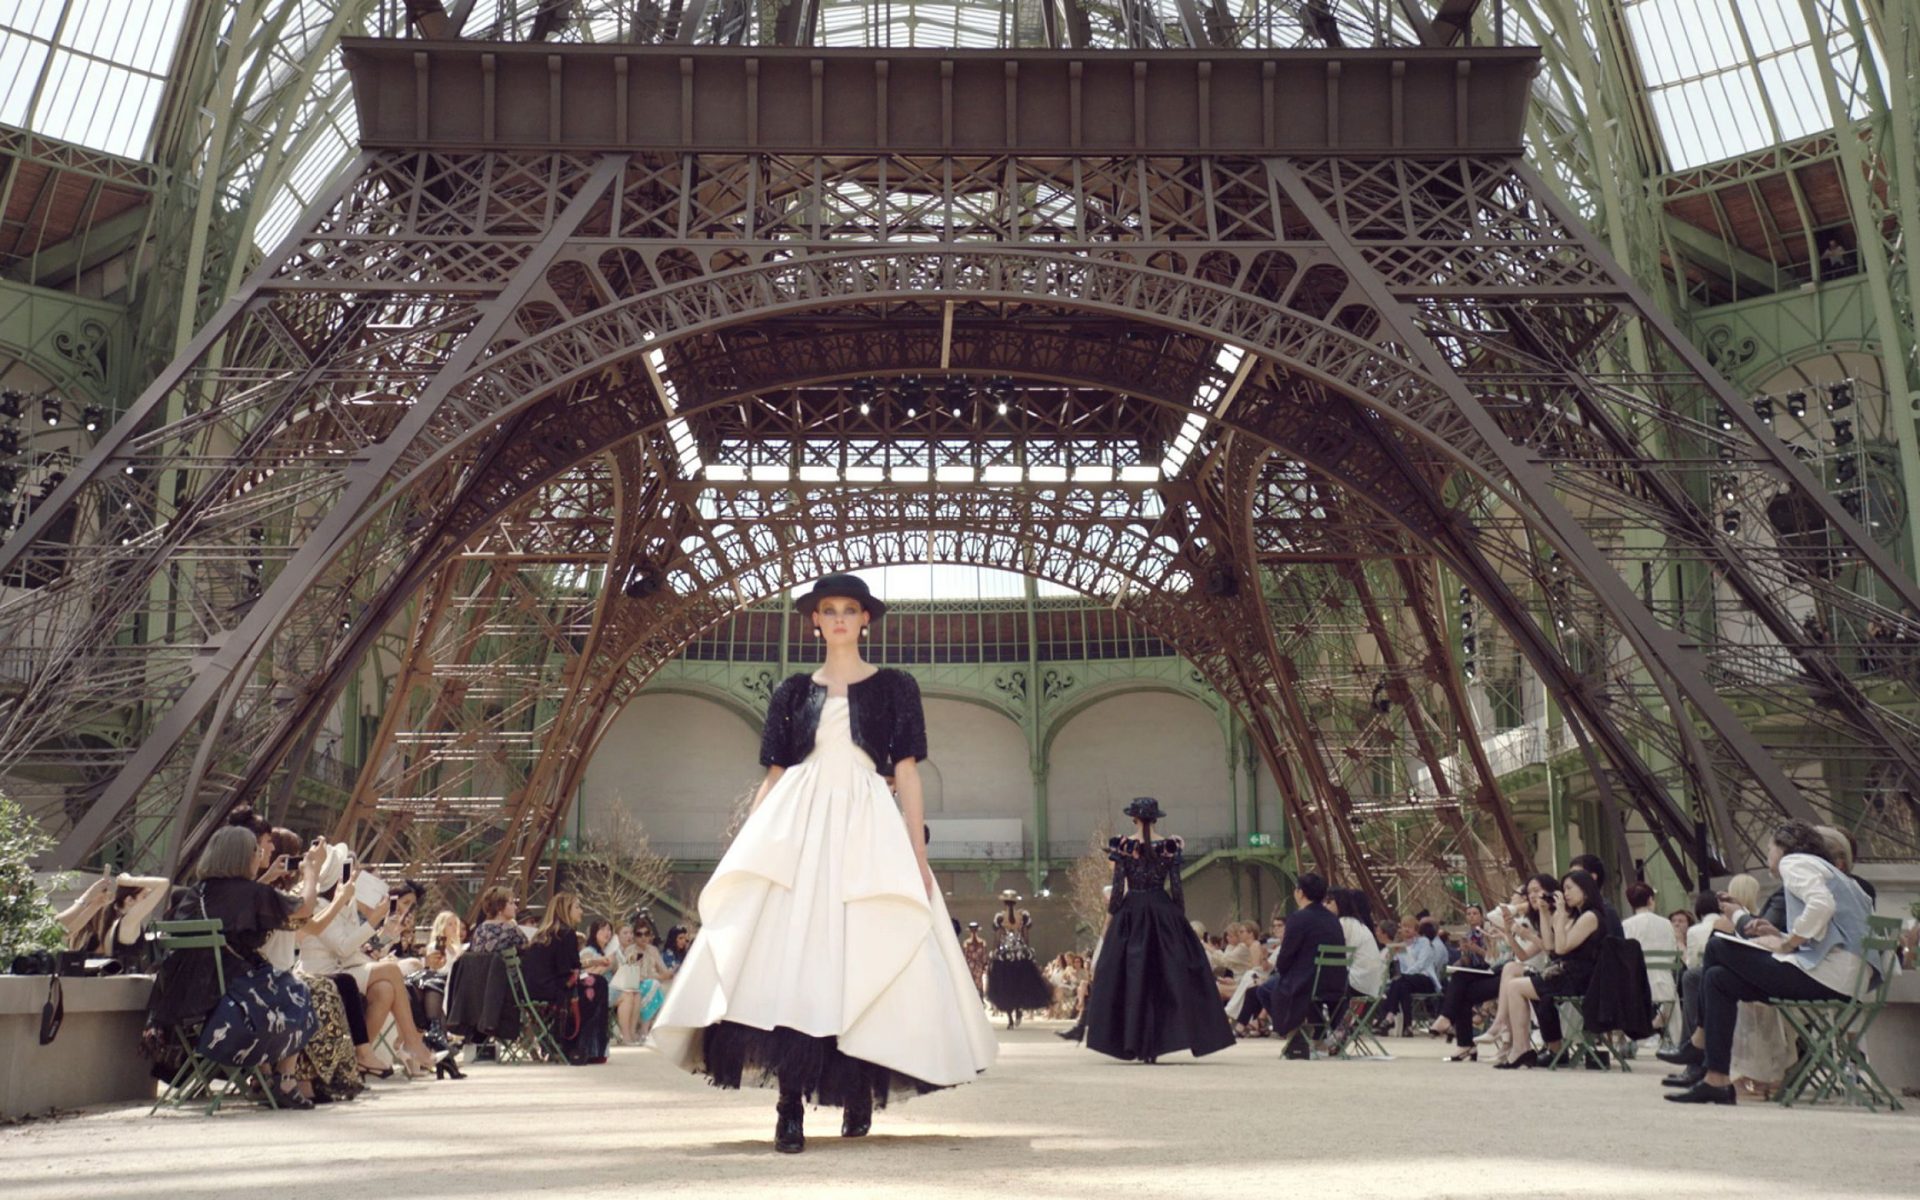 5 of Karl Lagerfeld's Most Spectacular Runway Shows - Galerie